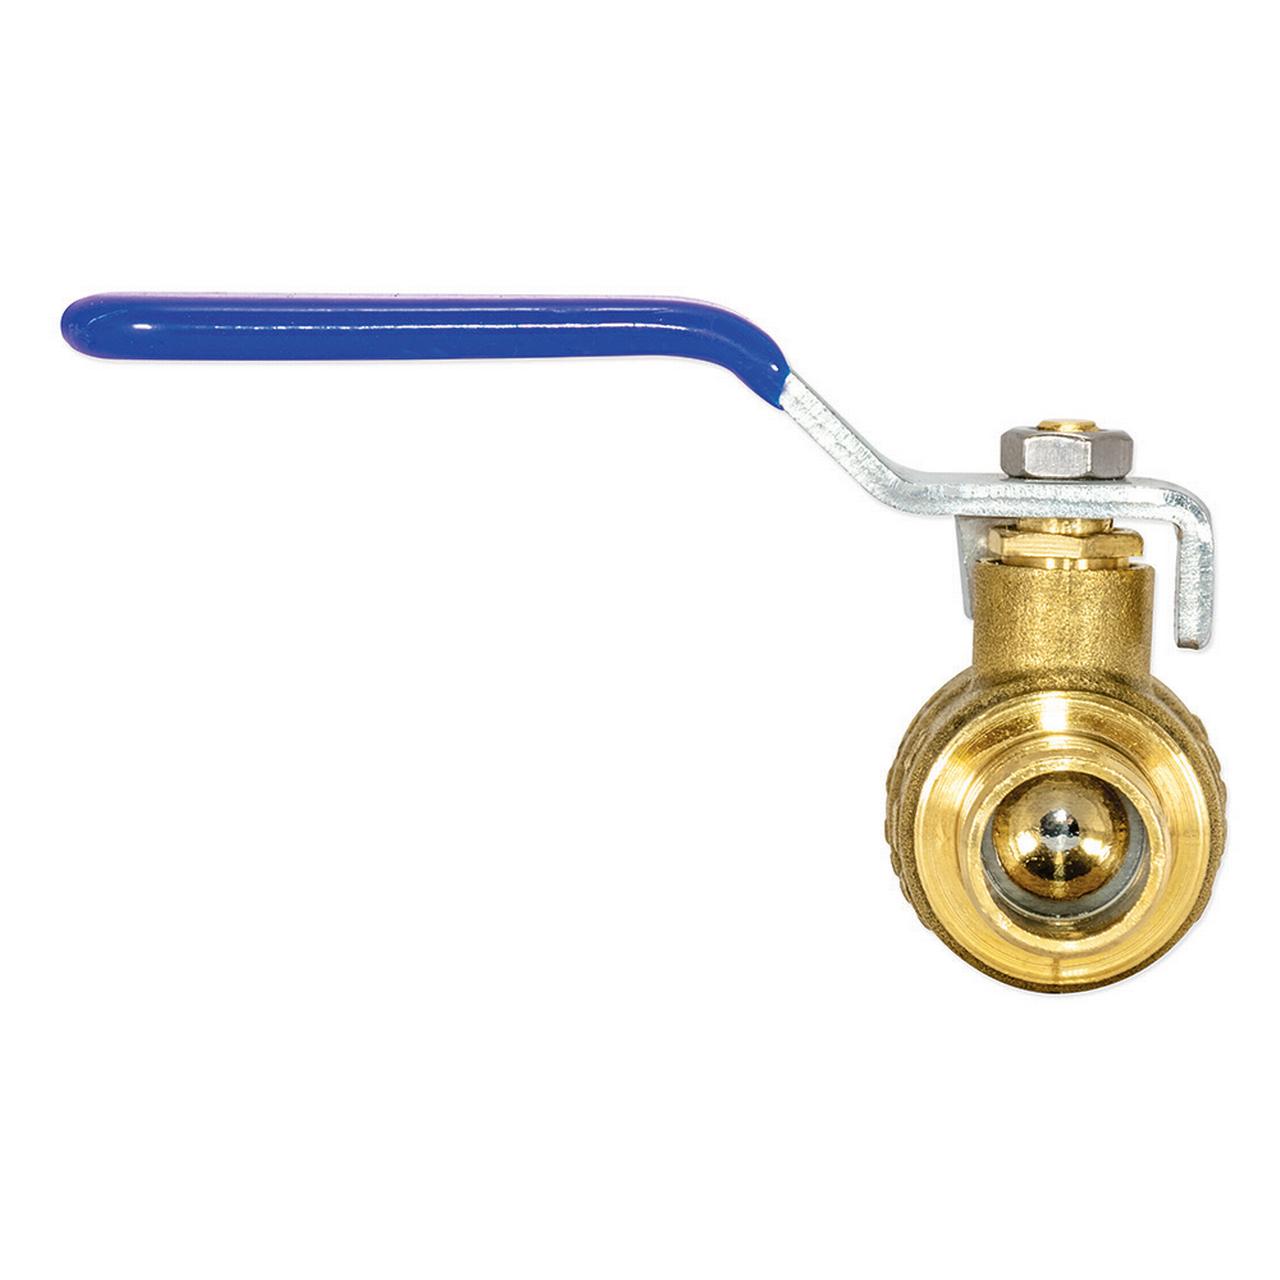 Eastman 20094LF Heavy-Duty PEX Ball Valve with Handle, 3/4 inch, Brass - image 4 of 6